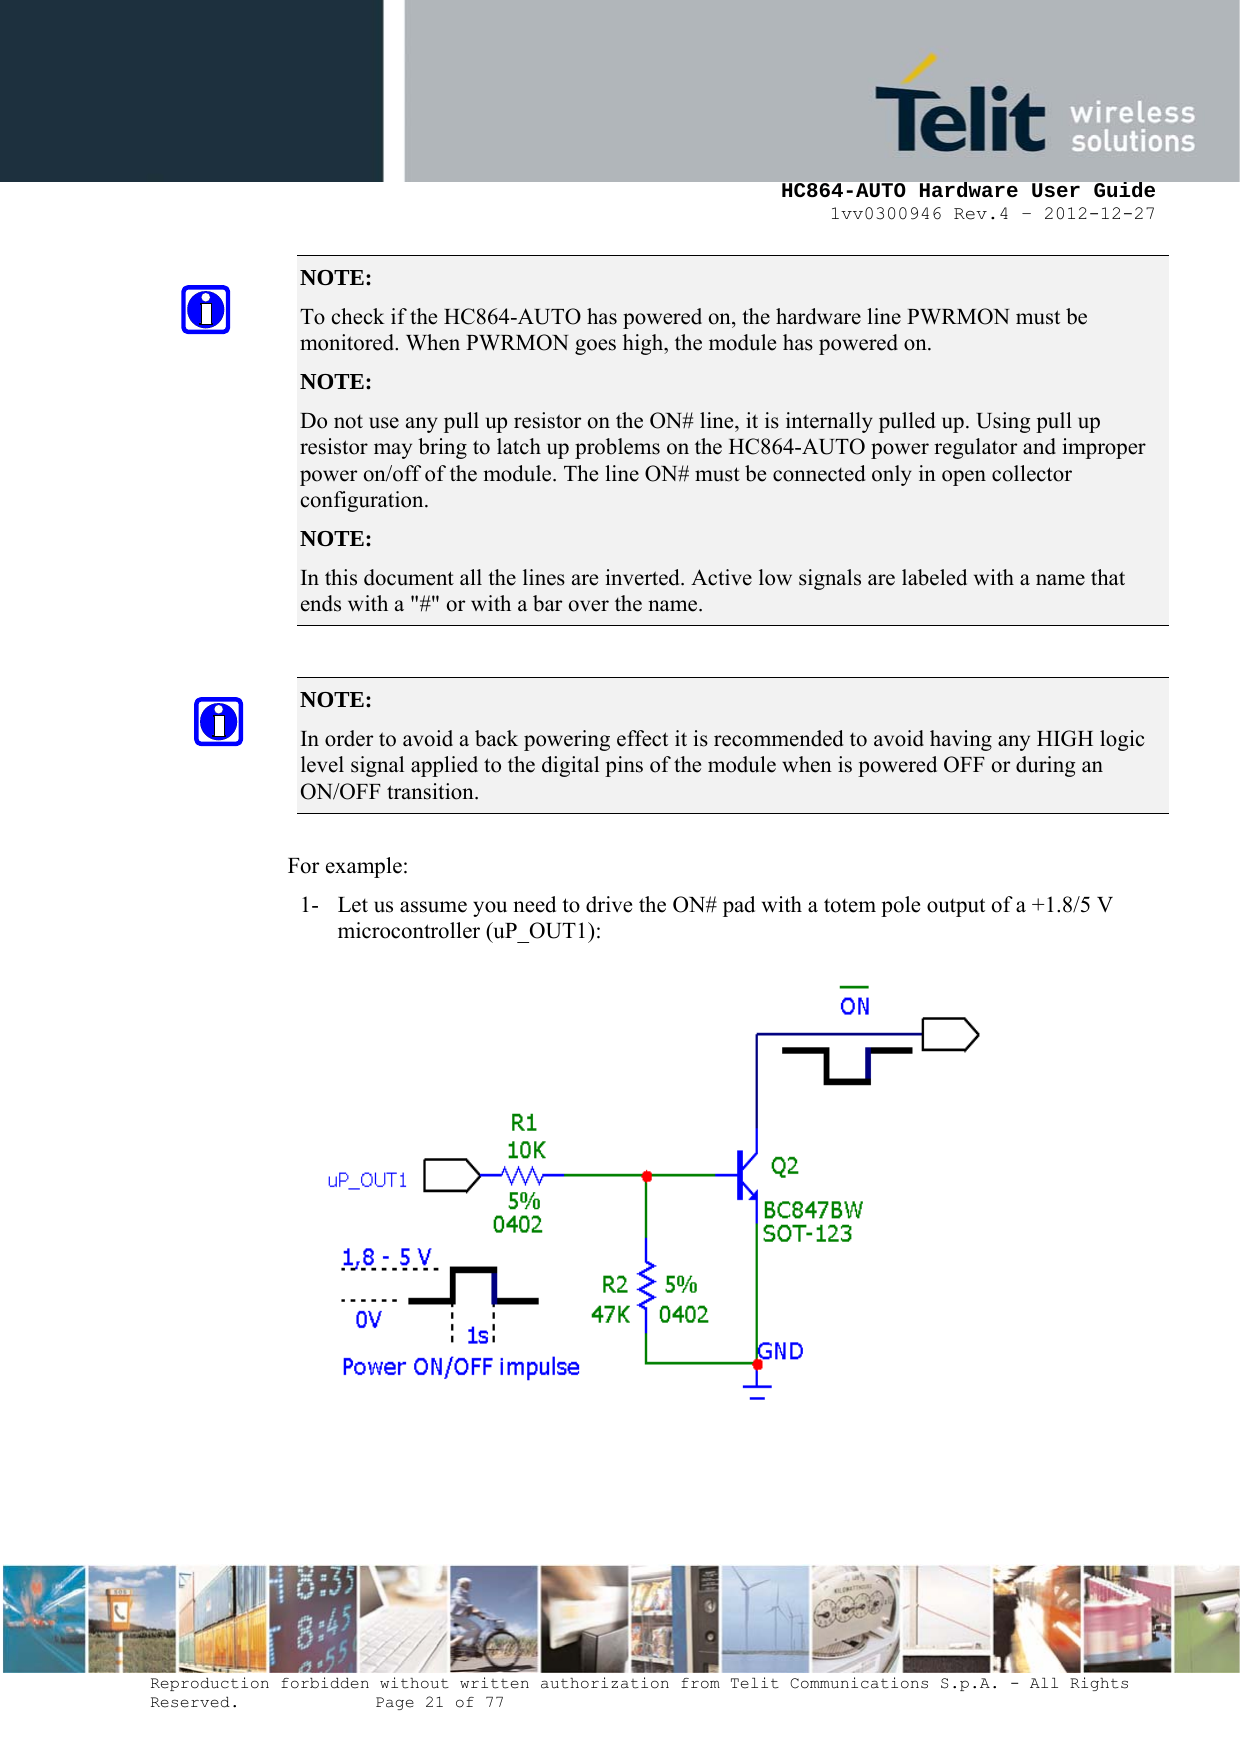     HC864-AUTO Hardware User Guide 1vv0300946 Rev.4 – 2012-12-27 Reproduction forbidden without written authorization from Telit Communications S.p.A. - All Rights Reserved.    Page 21 of 77  NOTE:  To check if the HC864-AUTO has powered on, the hardware line PWRMON must be monitored. When PWRMON goes high, the module has powered on. NOTE:  Do not use any pull up resistor on the ON# line, it is internally pulled up. Using pull up resistor may bring to latch up problems on the HC864-AUTO power regulator and improper power on/off of the module. The line ON# must be connected only in open collector configuration. NOTE:  In this document all the lines are inverted. Active low signals are labeled with a name that ends with a &quot;#&quot; or with a bar over the name.  NOTE:  In order to avoid a back powering effect it is recommended to avoid having any HIGH logic level signal applied to the digital pins of the module when is powered OFF or during an ON/OFF transition.  For example: 1- Let us assume you need to drive the ON# pad with a totem pole output of a +1.8/5 V microcontroller (uP_OUT1):    